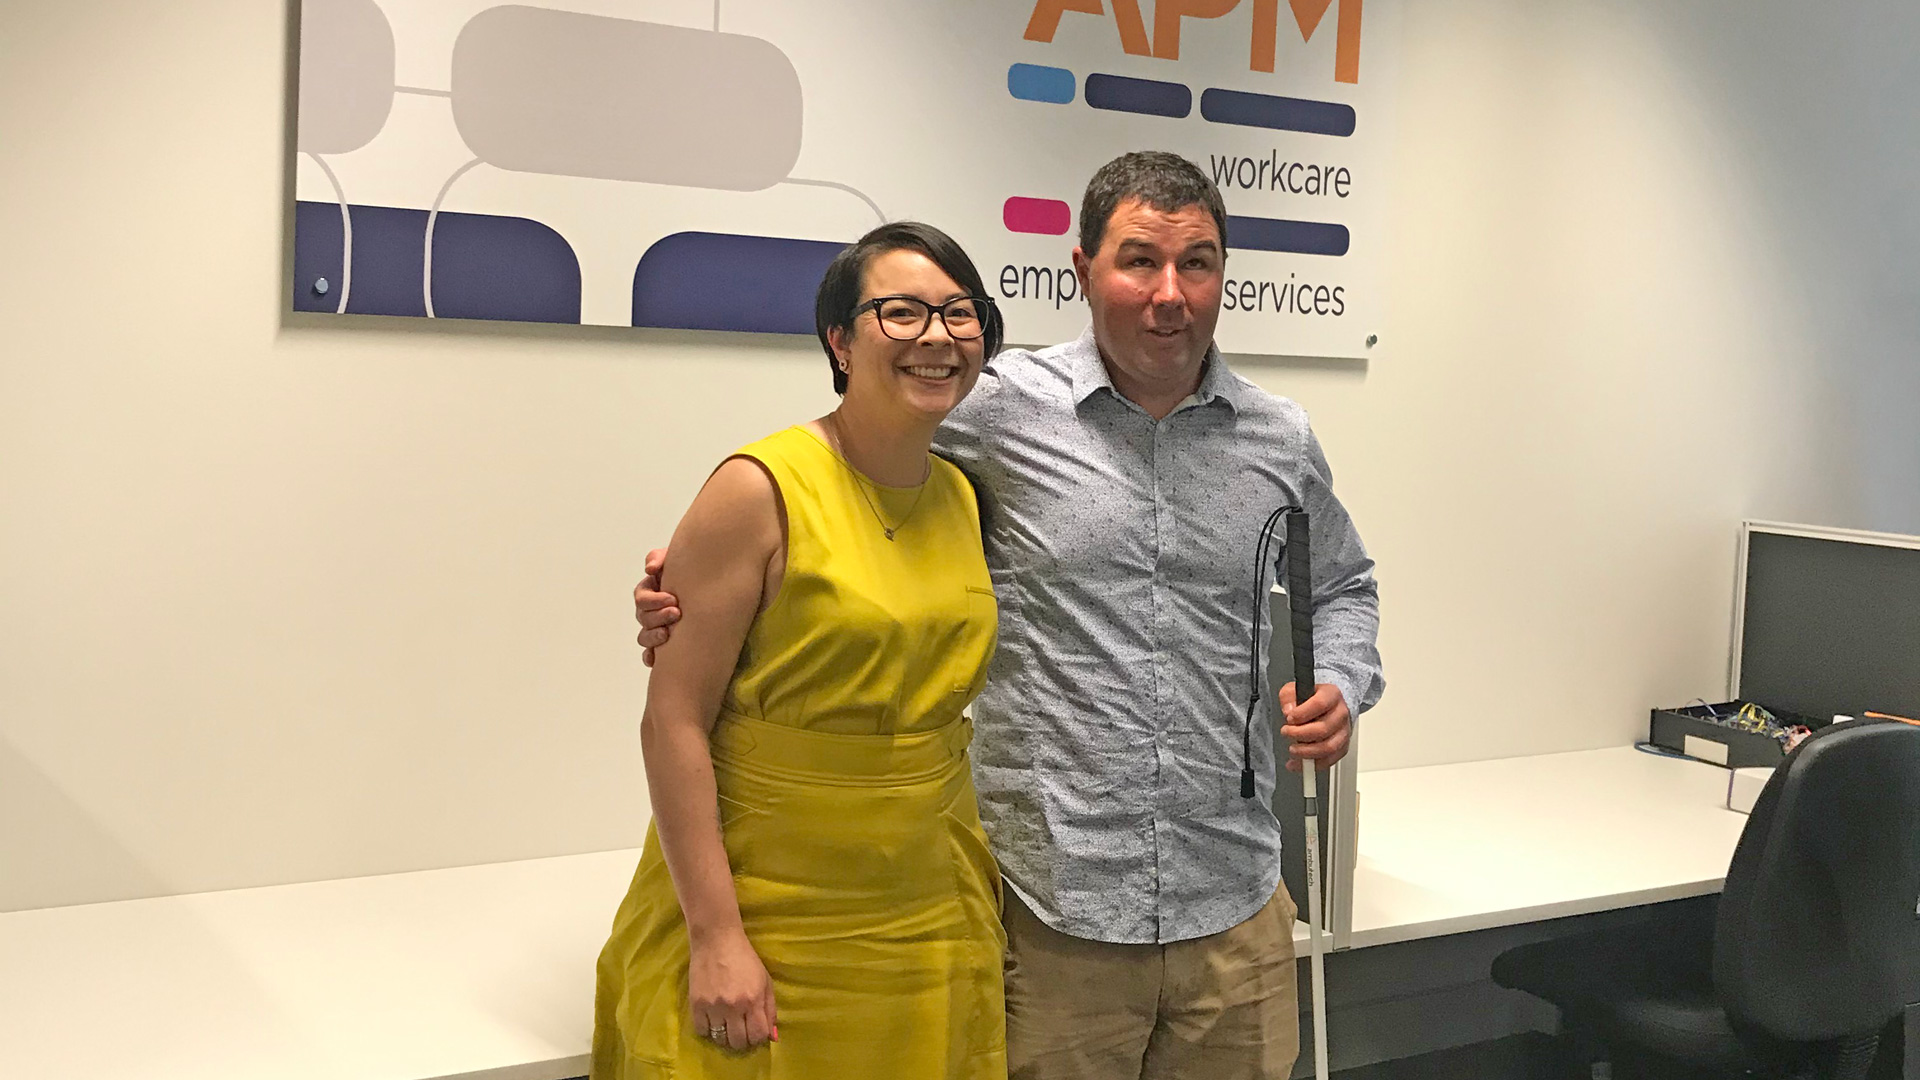 APM WorkCare's Amanda Johnston stands with Nathan in an APM office